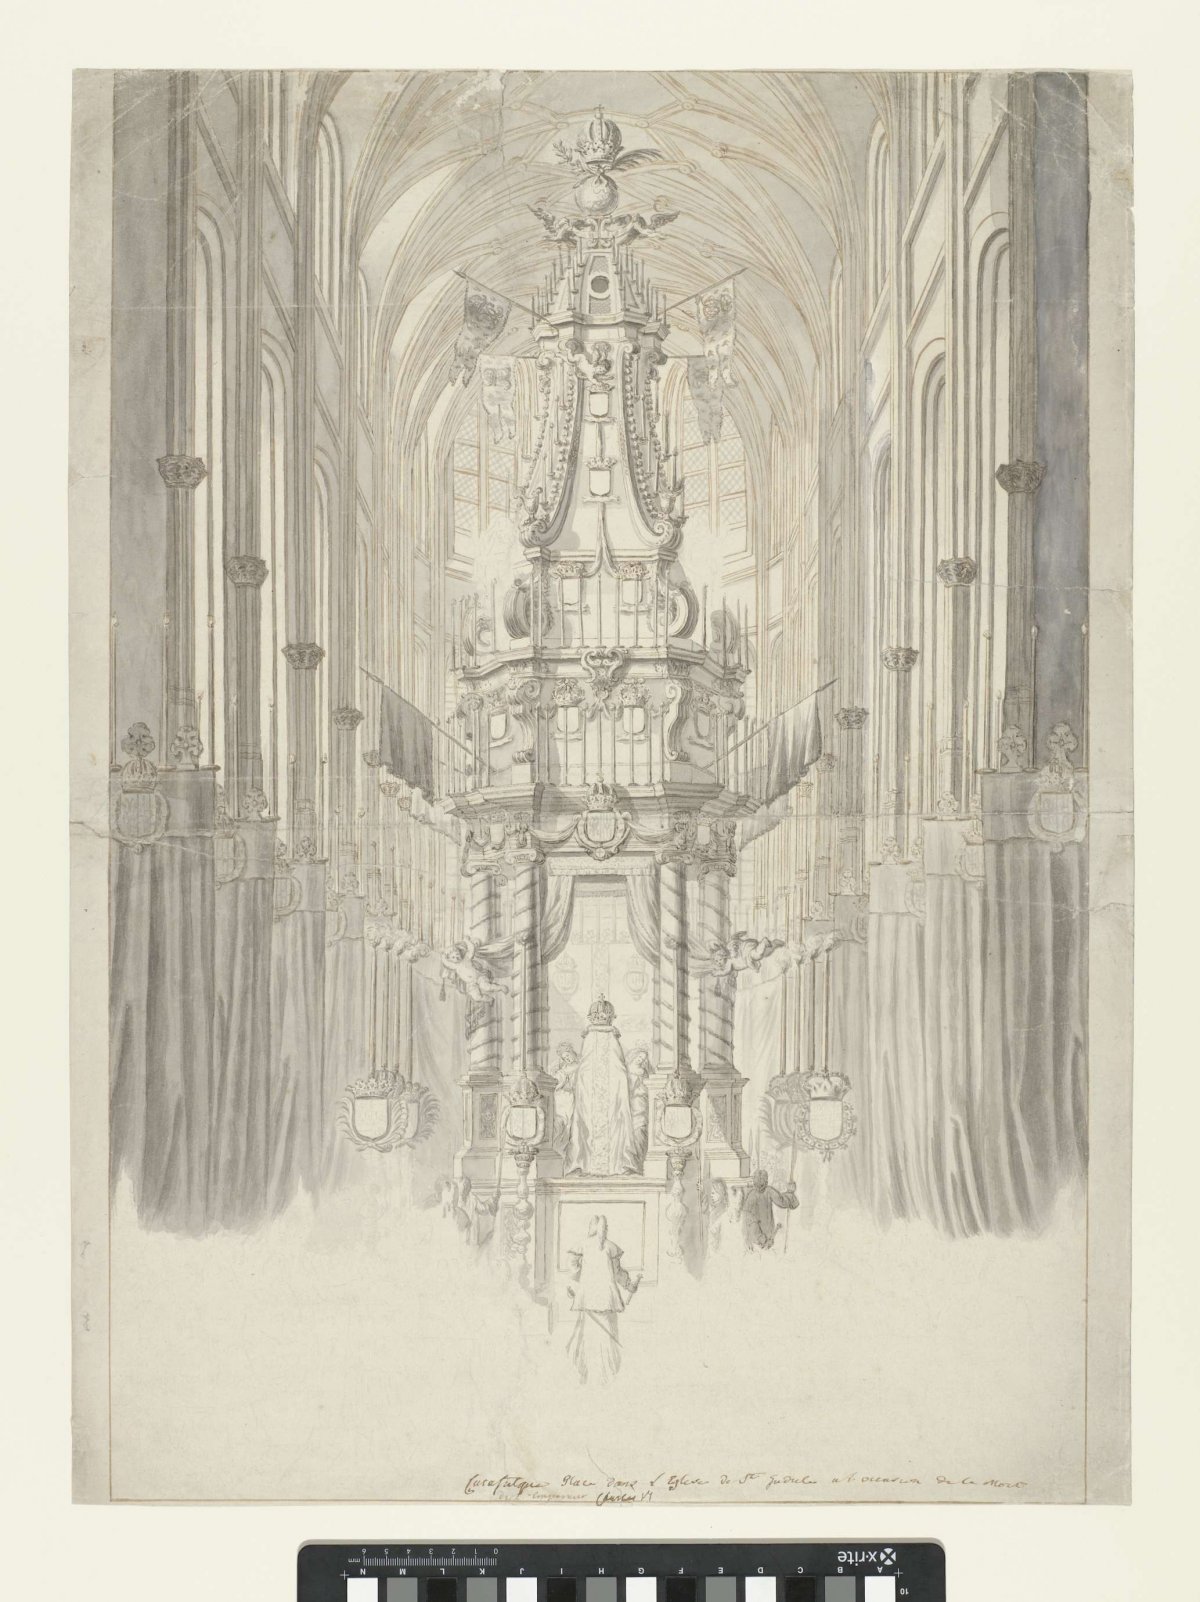 Catafalque for Emperor Charles VI, set up in St. Gudule Church in Brussels in 1740, Jacob Colin, 1740